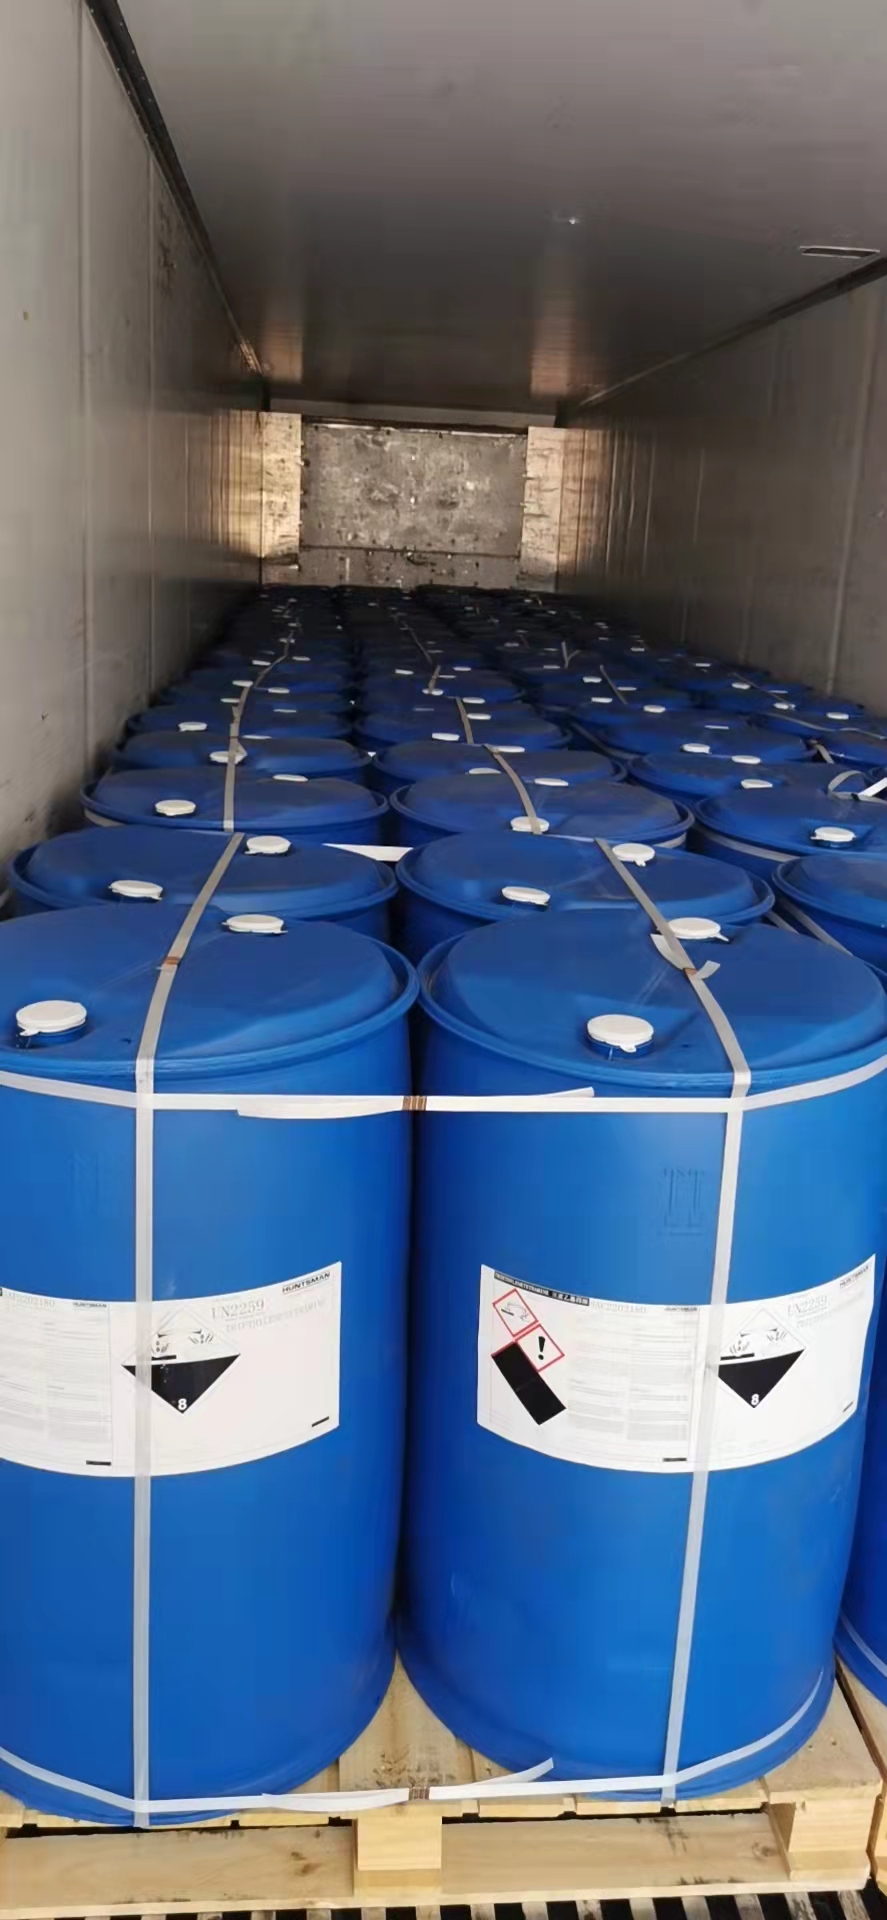 Discount wholesale (C2H5)2NC6H5 – High quality Ethylene vinyl acetate supplier in China 24937-78-8 – Mit-ivy